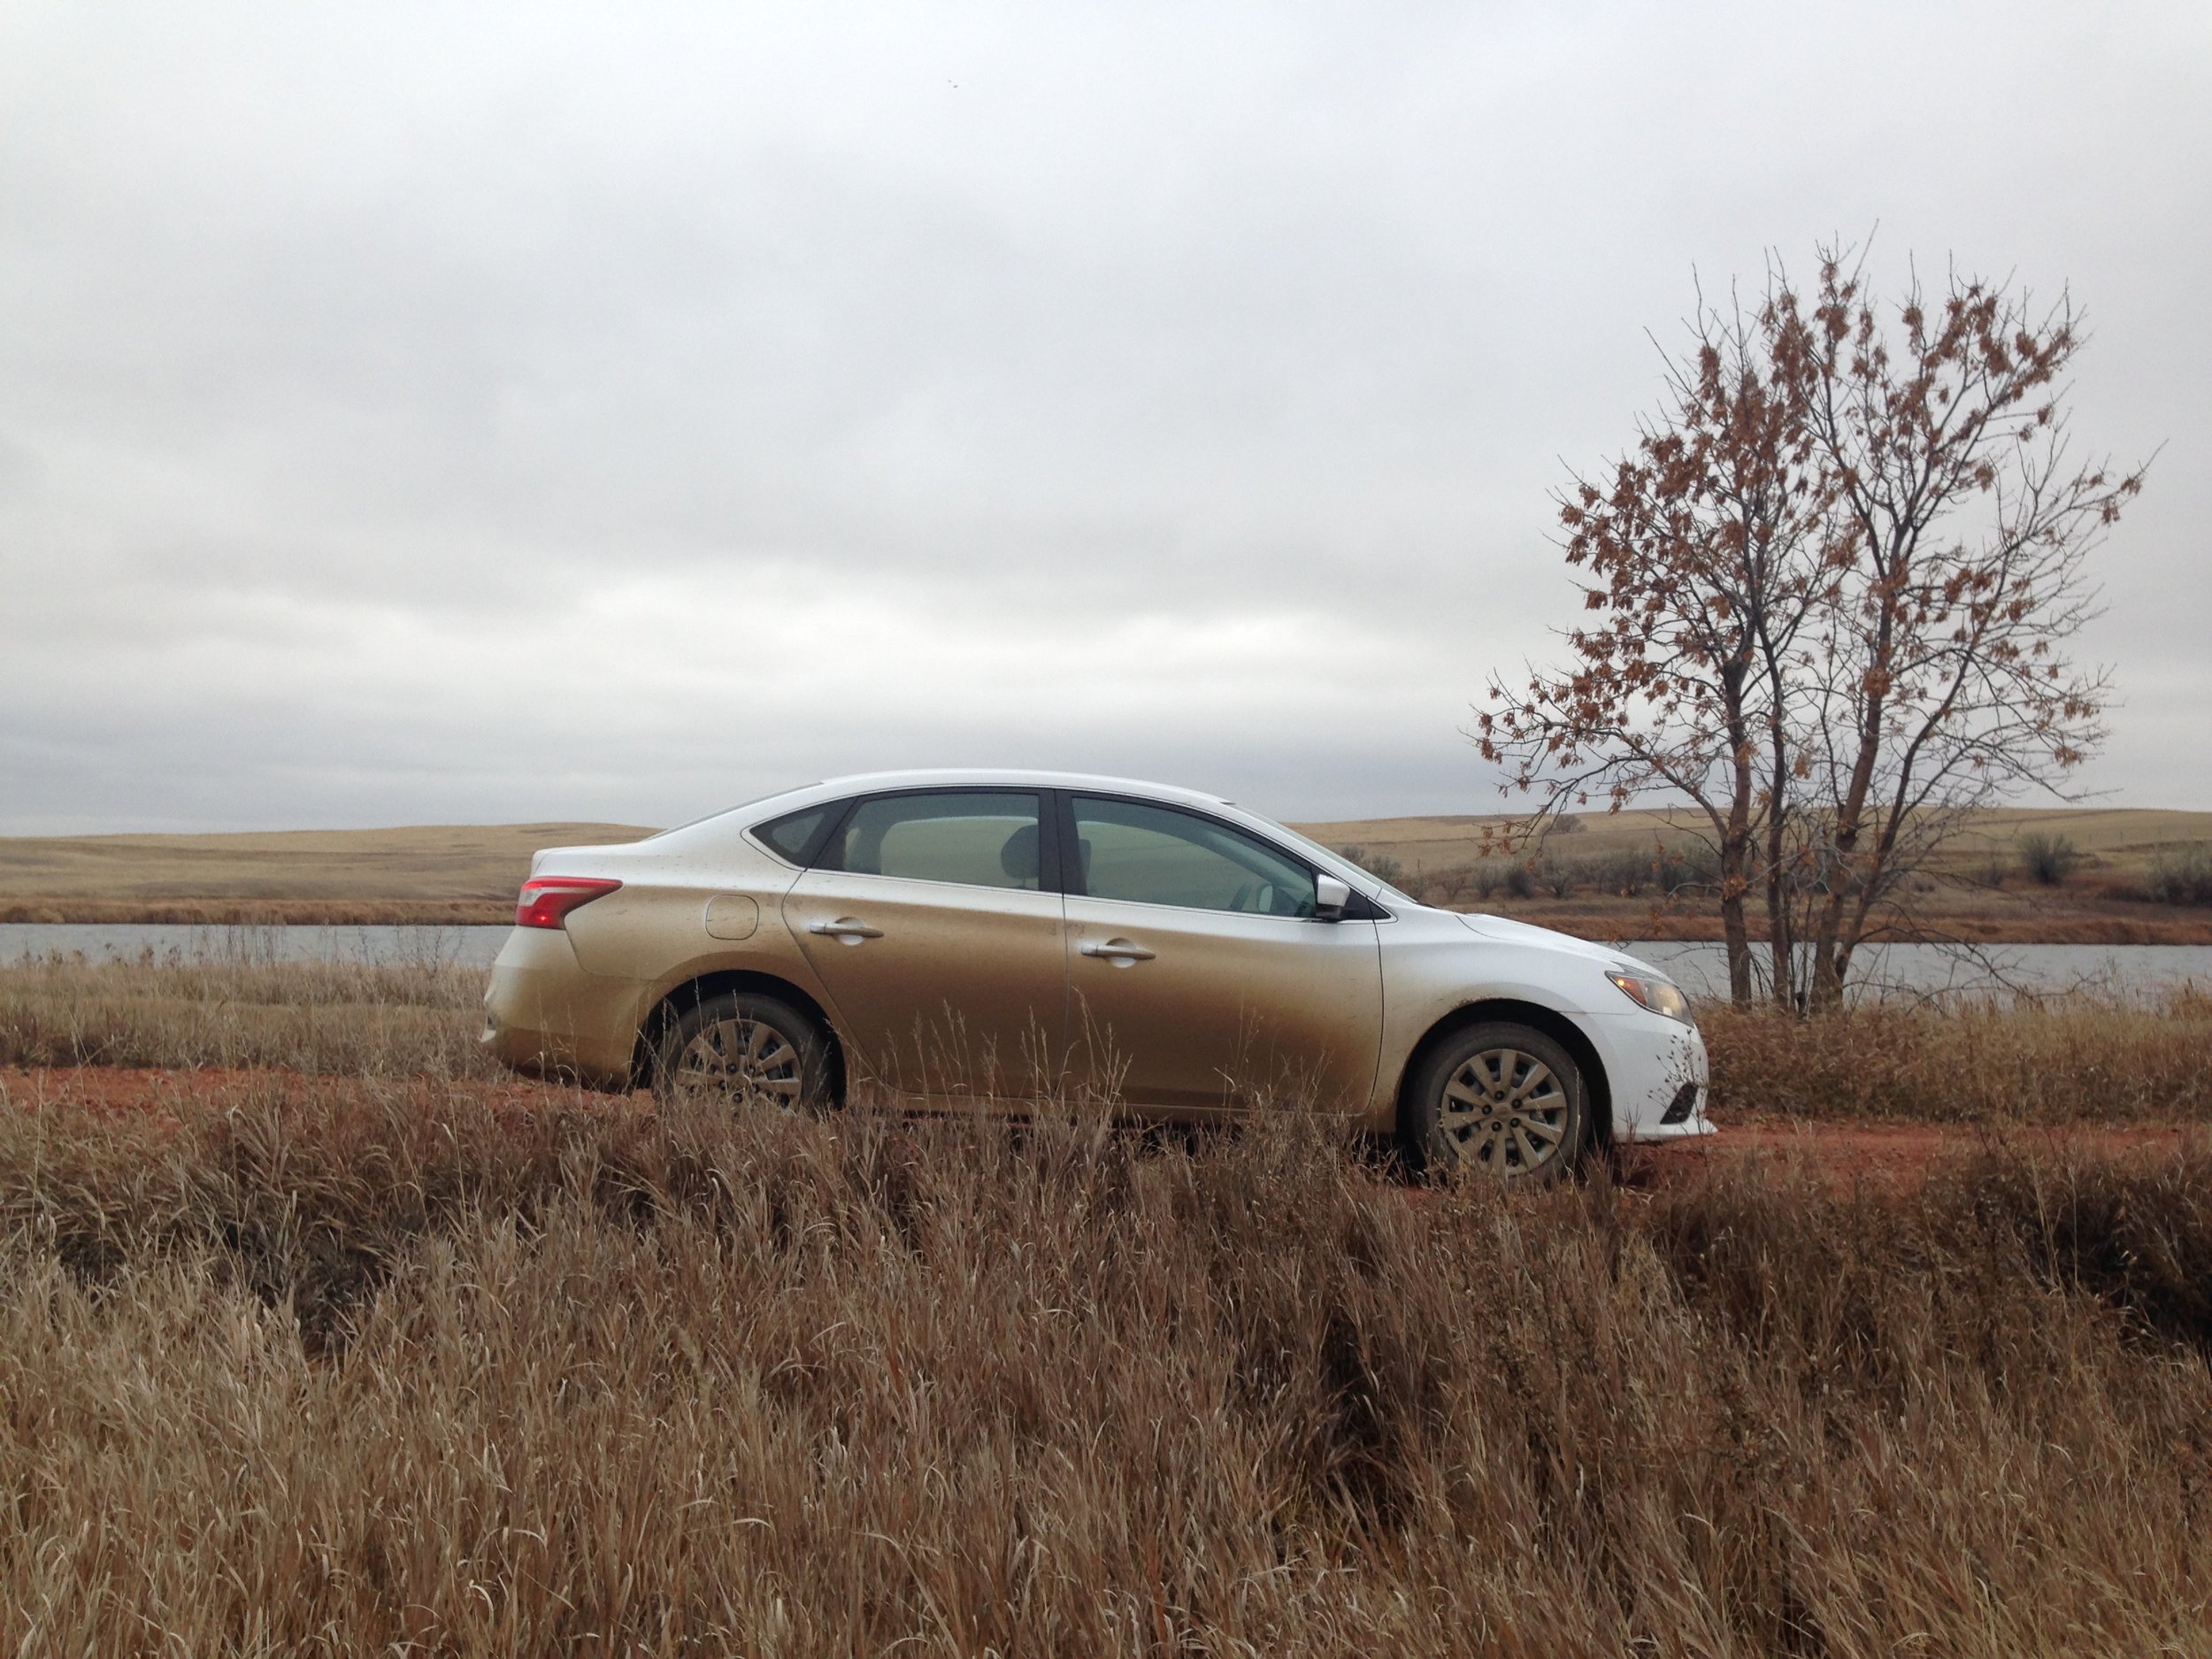  After six weeks of driving gravel roads my rental car started to blend in with the landscape!  